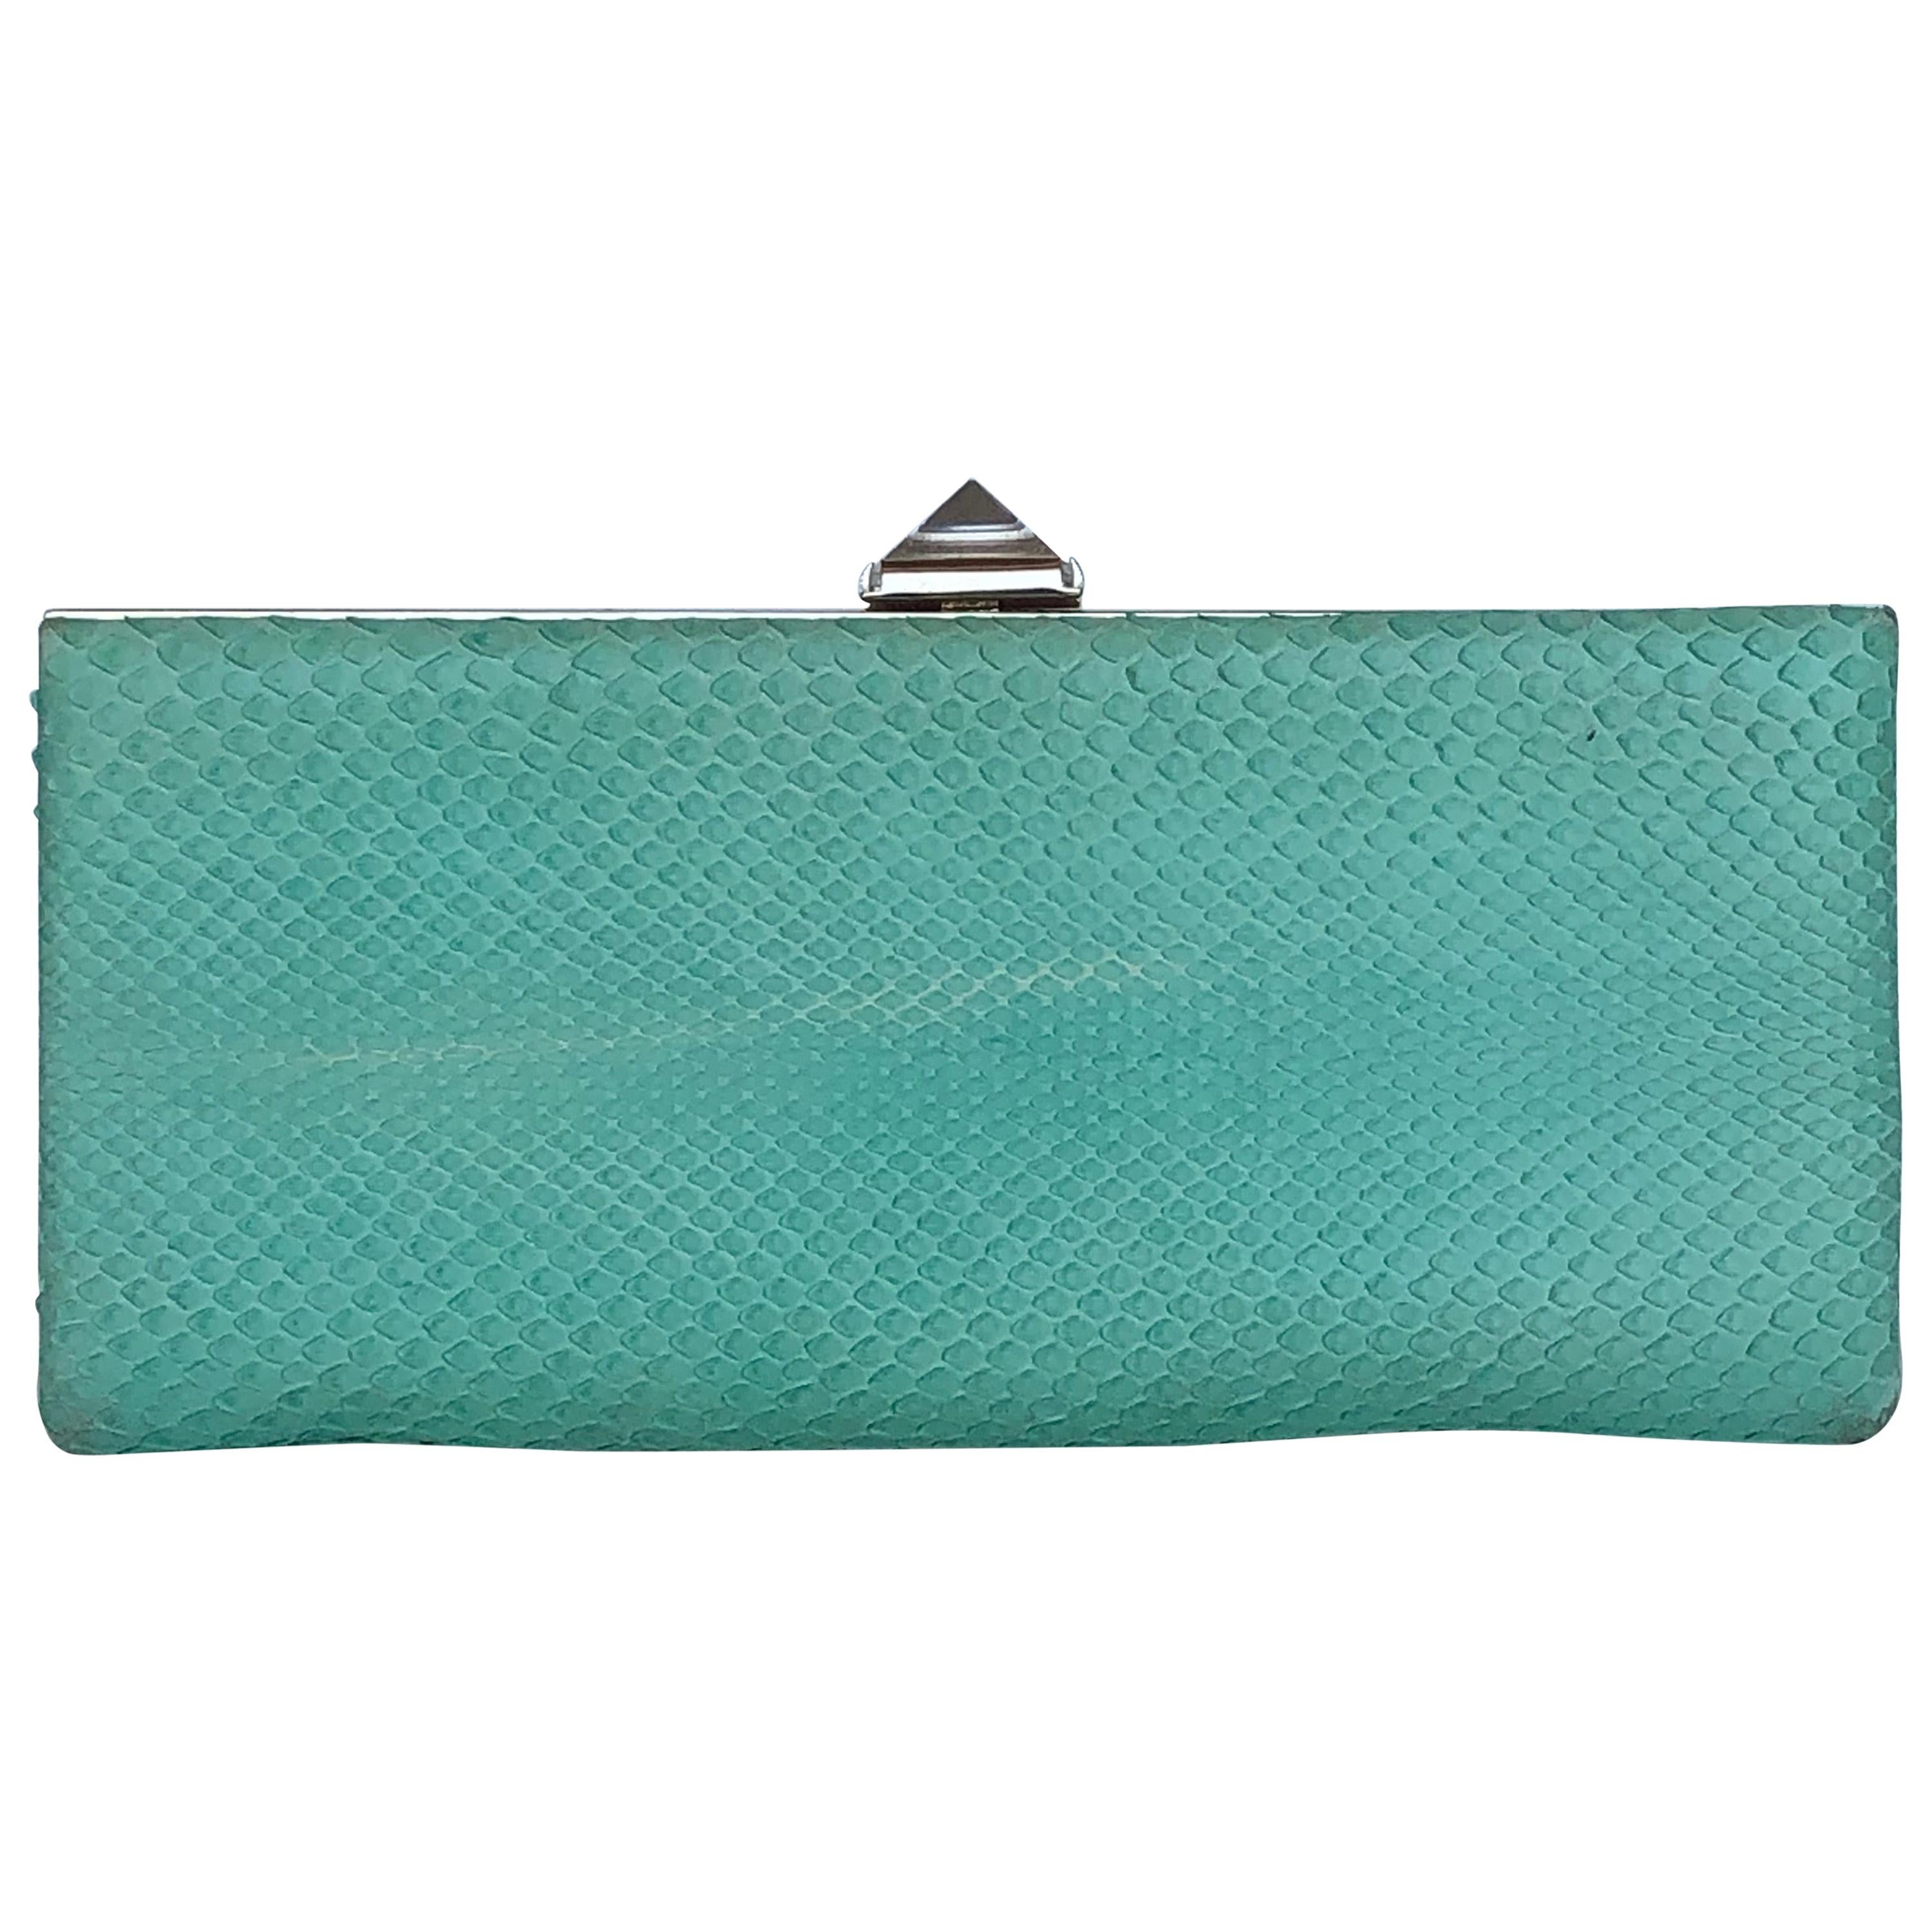  CHRISTIAN LOUBOUTIN mint green snake skin pyramid stud crystal evening clutch For Sale